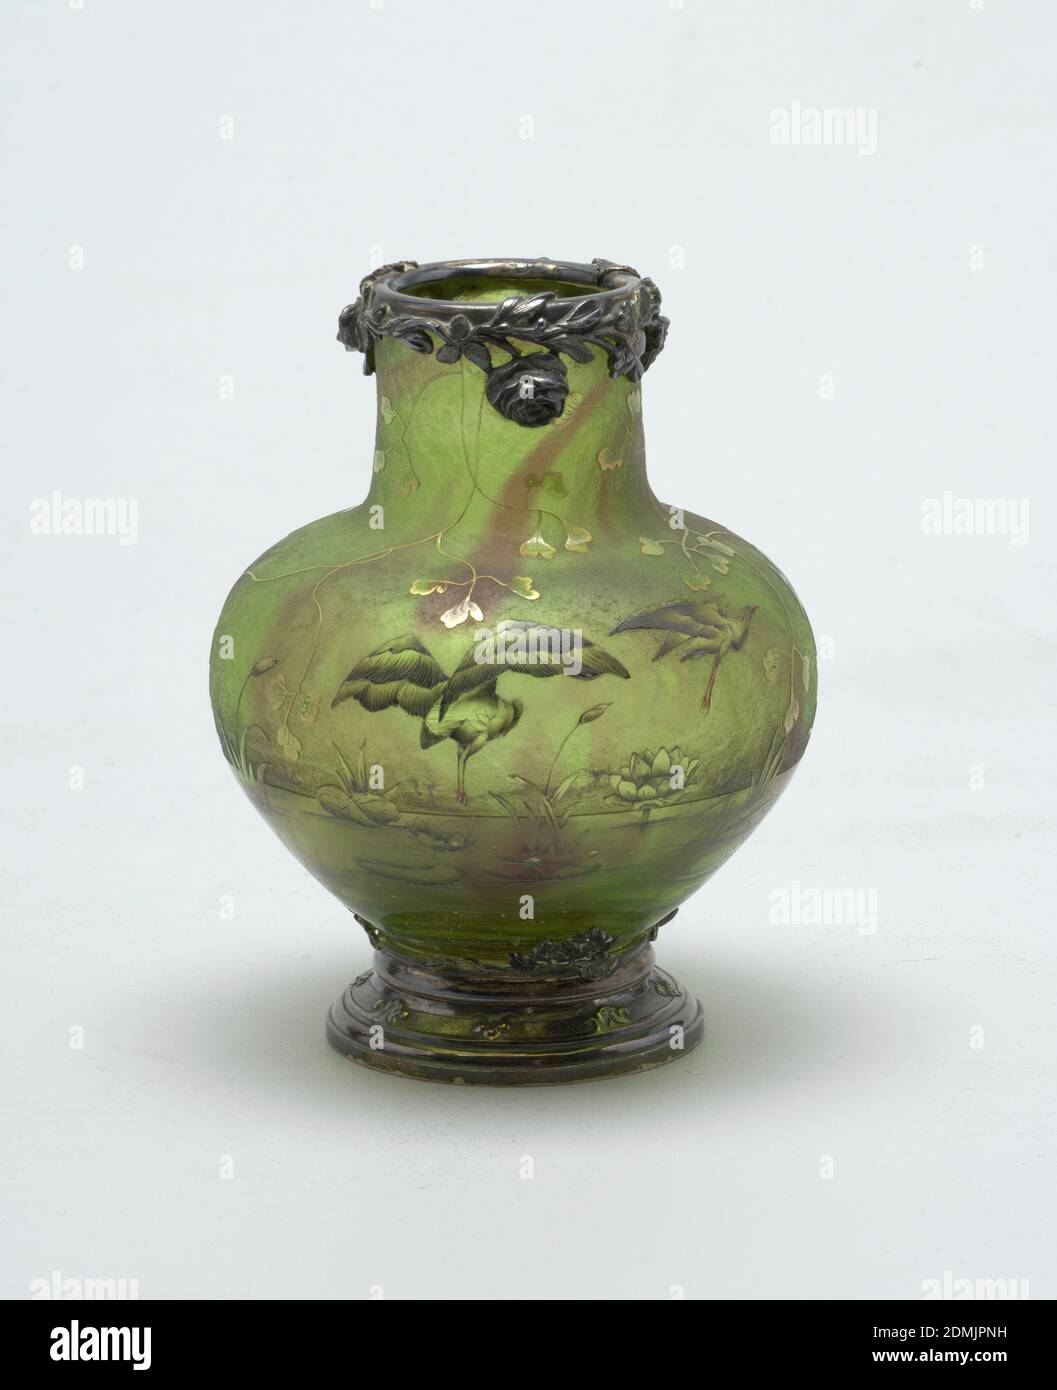 Vase, Daum Frères, French, founded 1875, Acid-etched and incised glass,  silver-gilt (mount), Squat ovoid body of deep green glass with dark red  interior mottling, straight neck. Silver-gilt base and lip mountings with